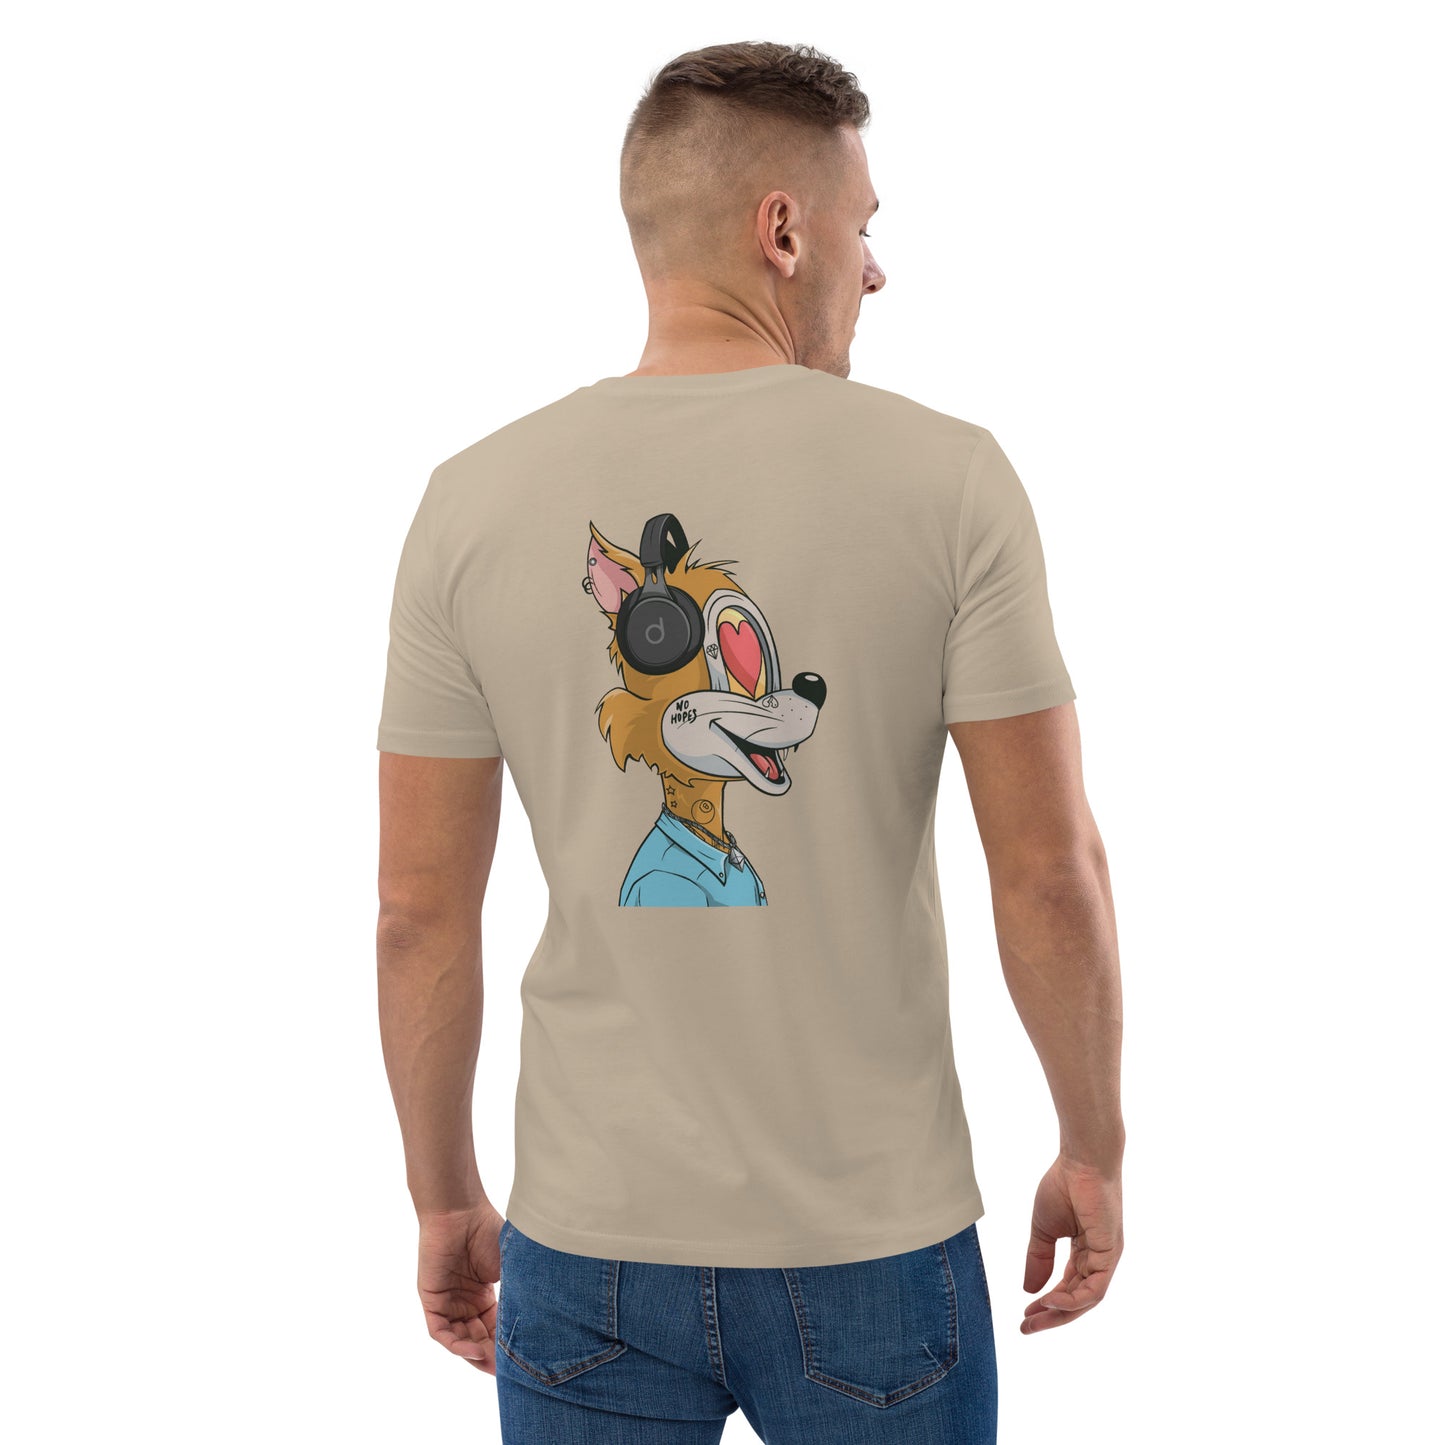 Unisex organic cotton t-shirt feat TOON #2425 (front embroidered + rear print)